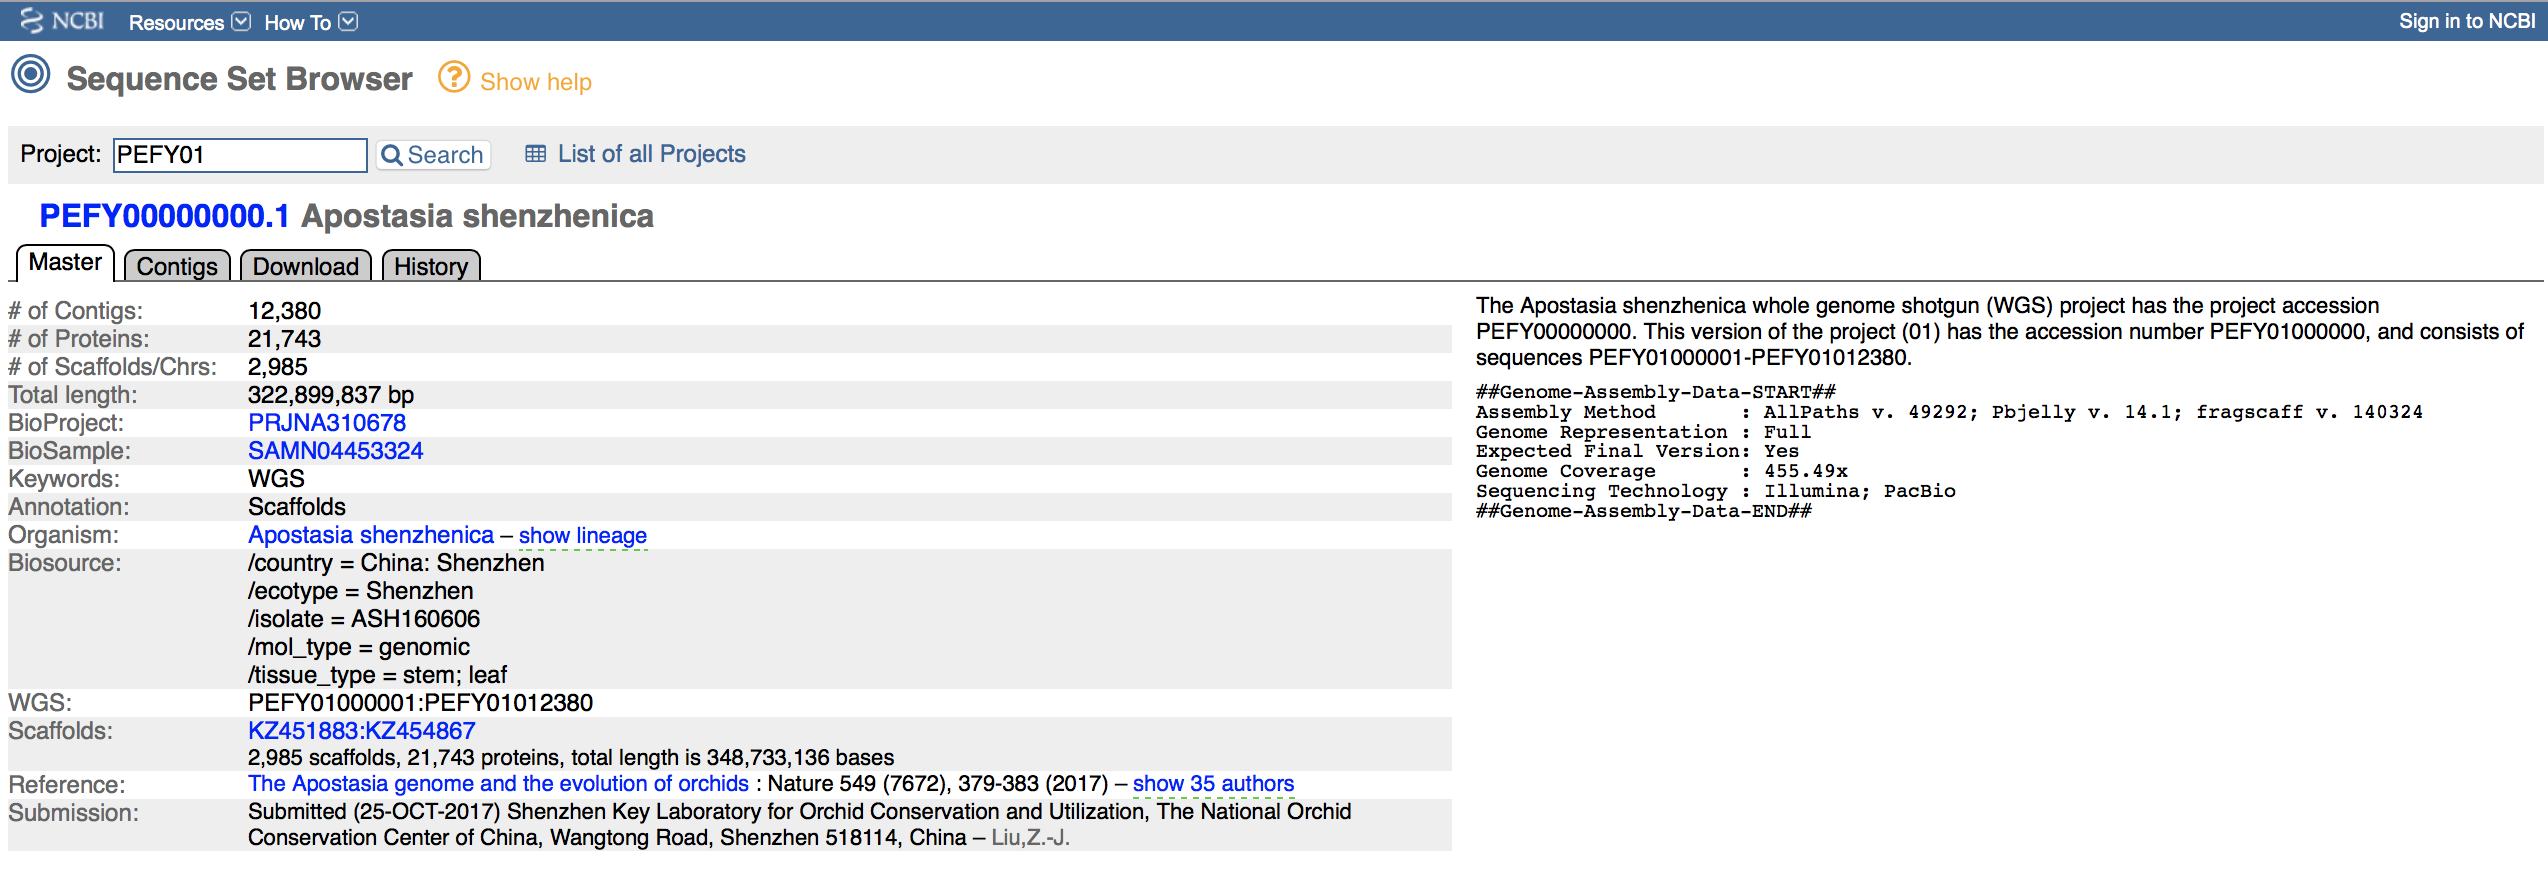 Screen shot of the NCBI website showing details about the accession containing the nuclear genome assembly of *Apostasia shenzhenica* under the accession PEFY01.